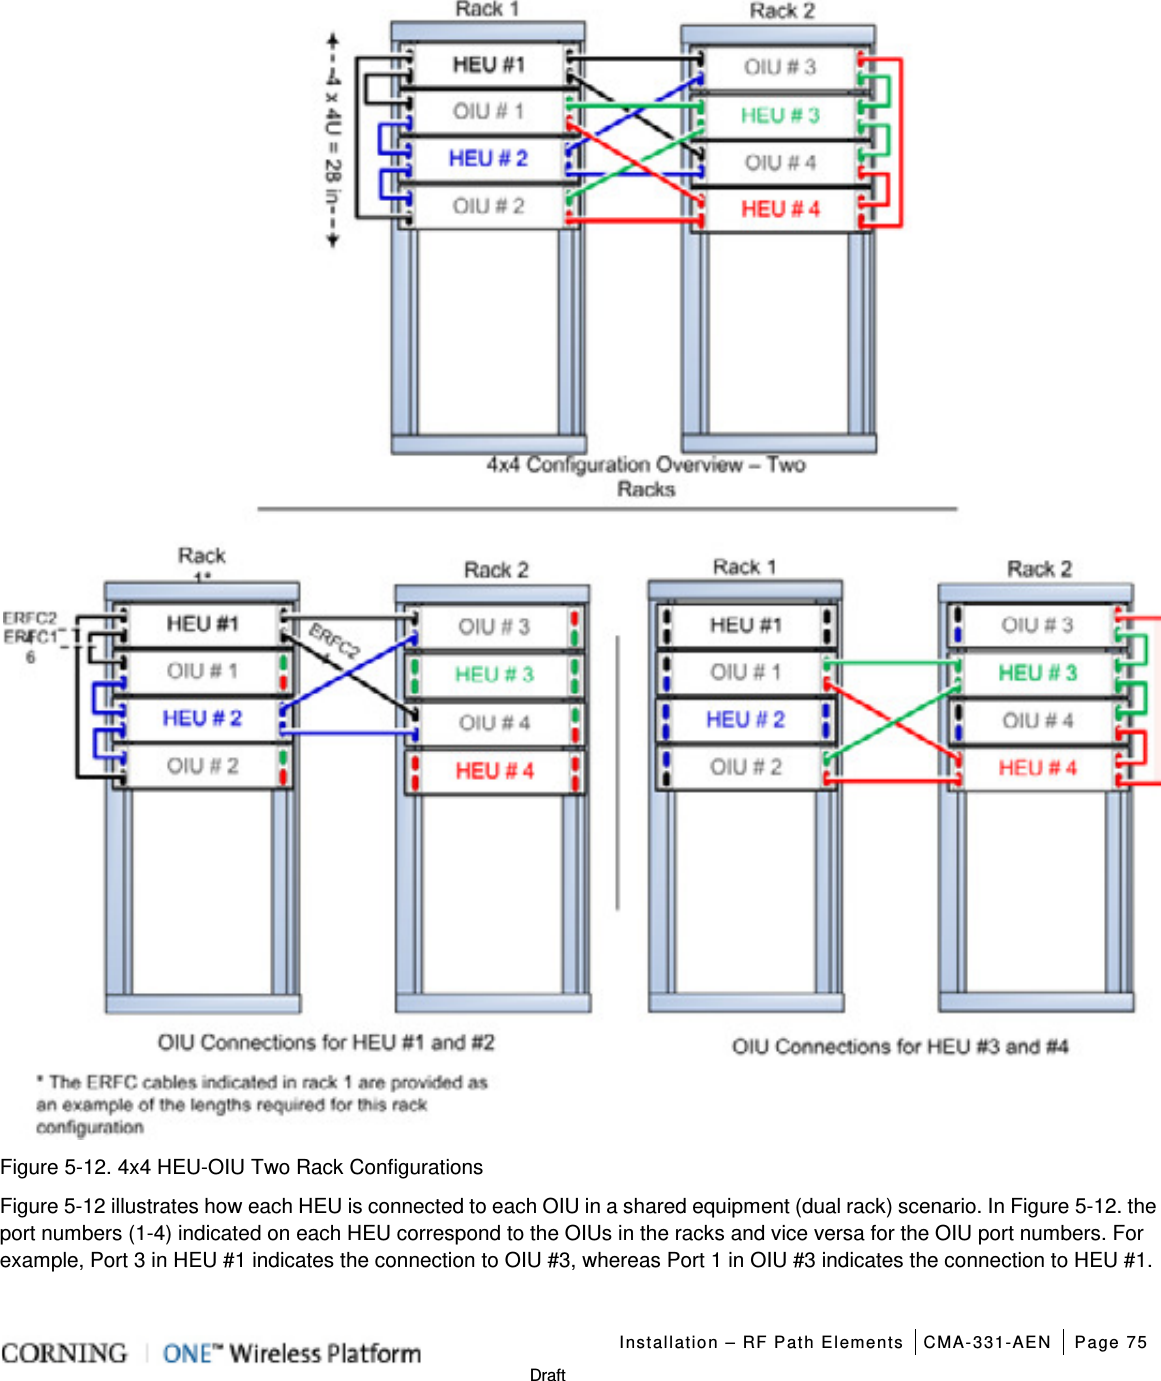   Installation – RF Path Elements CMA-331-AEN Page 75   Draft   Figure  5-12. 4x4 HEU-OIU Two Rack Configurations Figure  5-12 illustrates how each HEU is connected to each OIU in a shared equipment (dual rack) scenario. In Figure  5-12. the port numbers (1-4) indicated on each HEU correspond to the OIUs in the racks and vice versa for the OIU port numbers. For example, Port 3 in HEU #1 indicates the connection to OIU #3, whereas Port 1 in OIU #3 indicates the connection to HEU #1.   